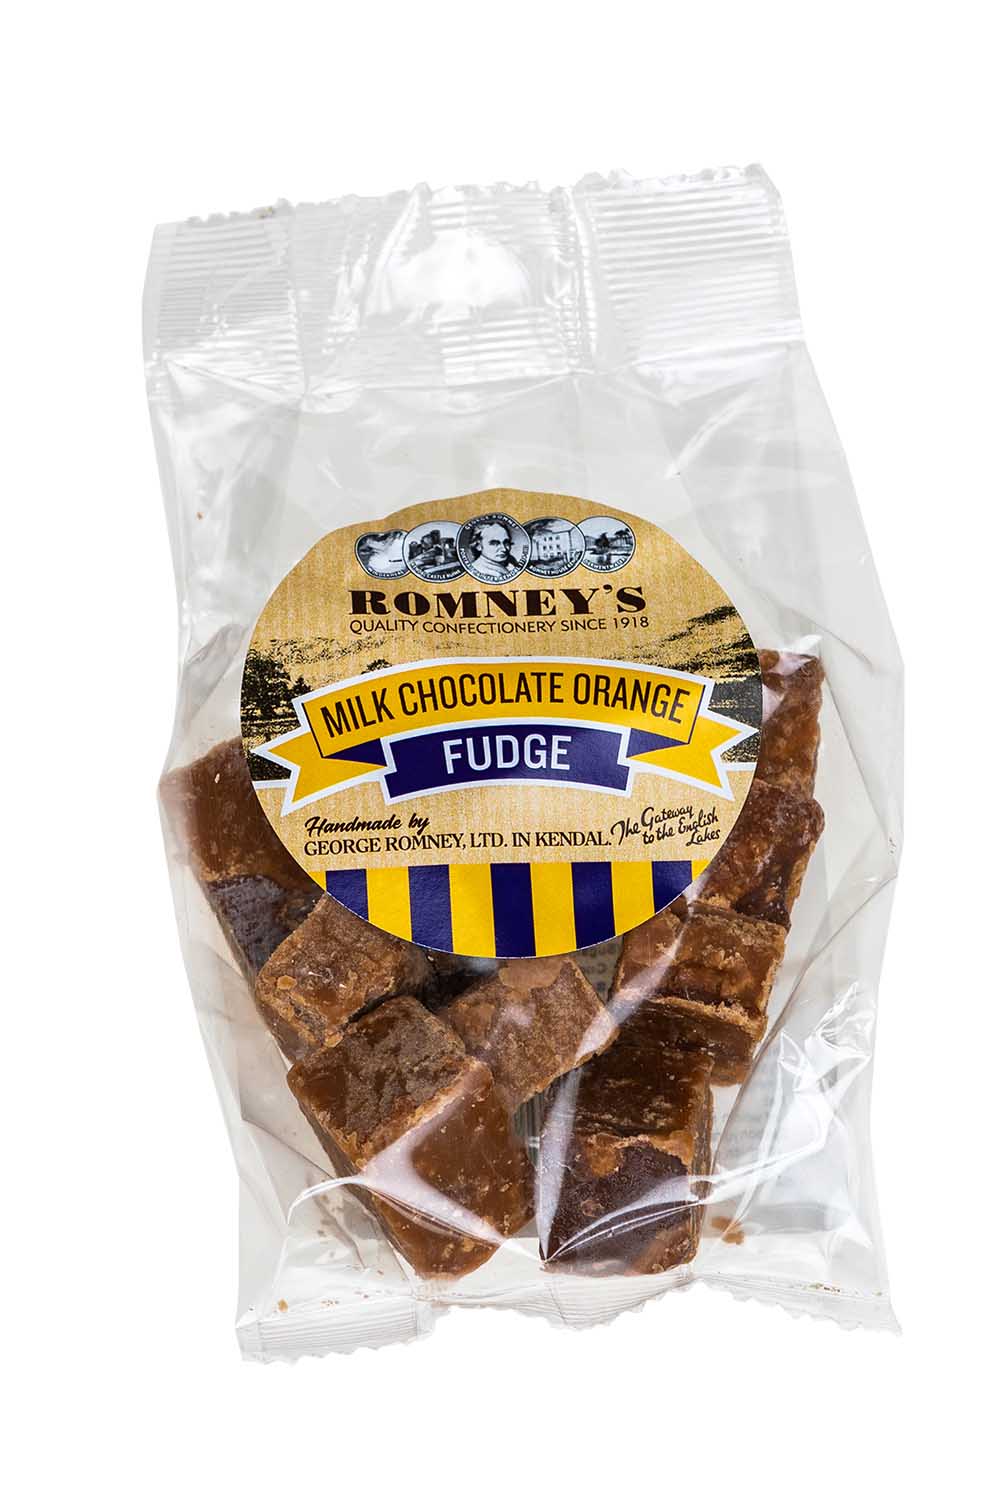 A transparent bag containing pieces of Fudge. The bag has a label on it that shows Romney's logo and says 'Milk Chocolate Orange Fudge'